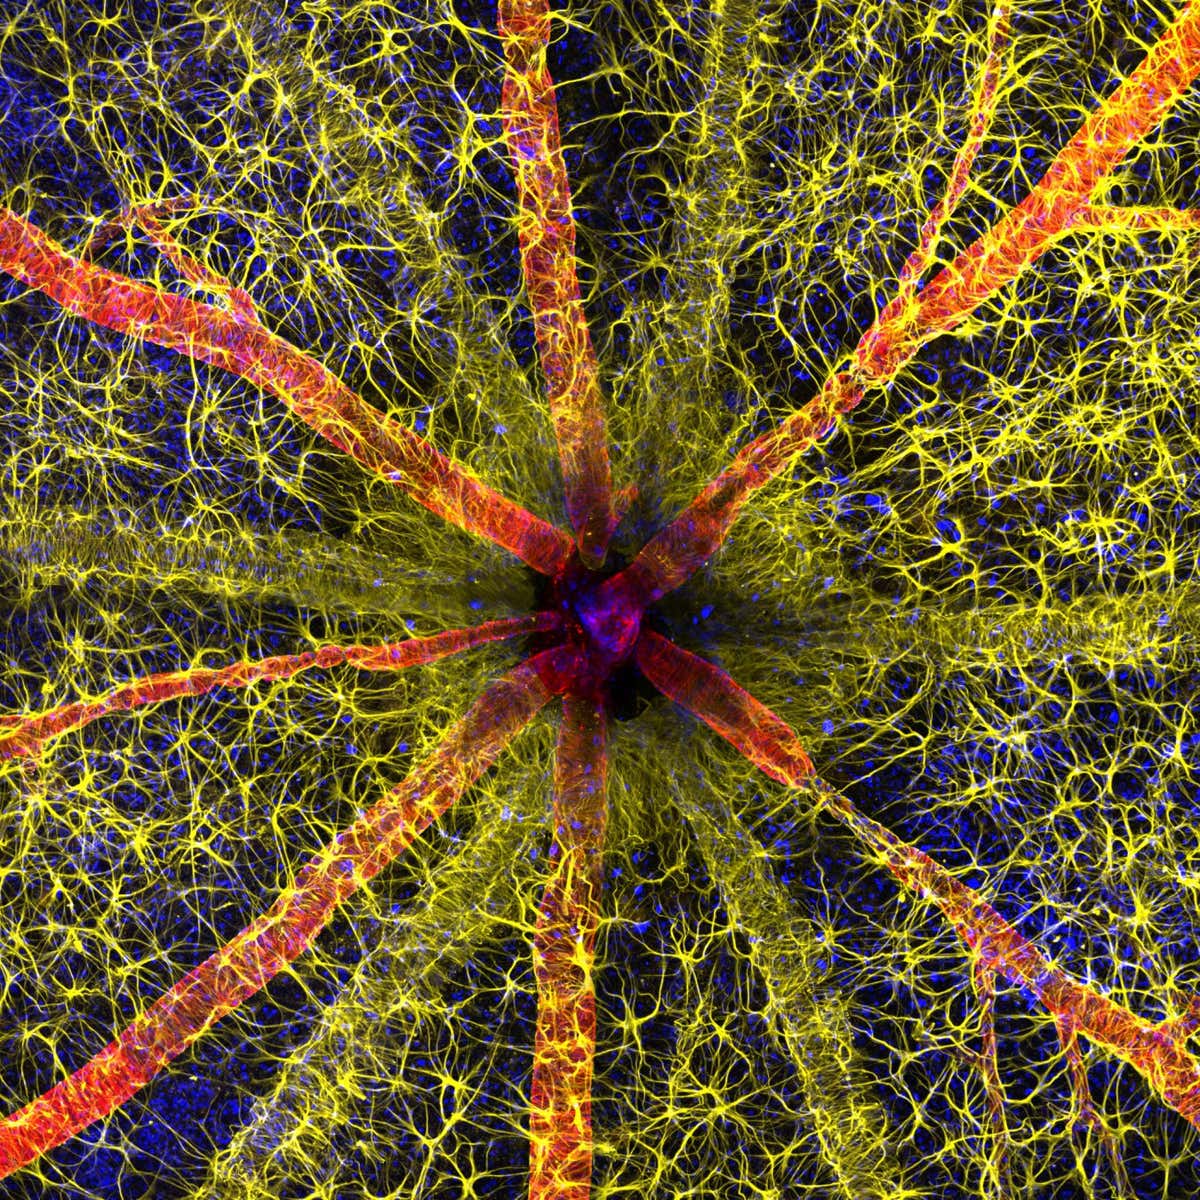 1st Place Hassanain Qambari & Jayden Dickson The Lions Eye Institute Department of Physiology & Pharmacology Perth, Western Australia, Australia Rodent optic nerve head showing astrocytes (yellow), contractile proteins (red) and retinal vasculature (green) Confocal, Fluorescence, Image Stacking 20X (Objective Lens Magnification)